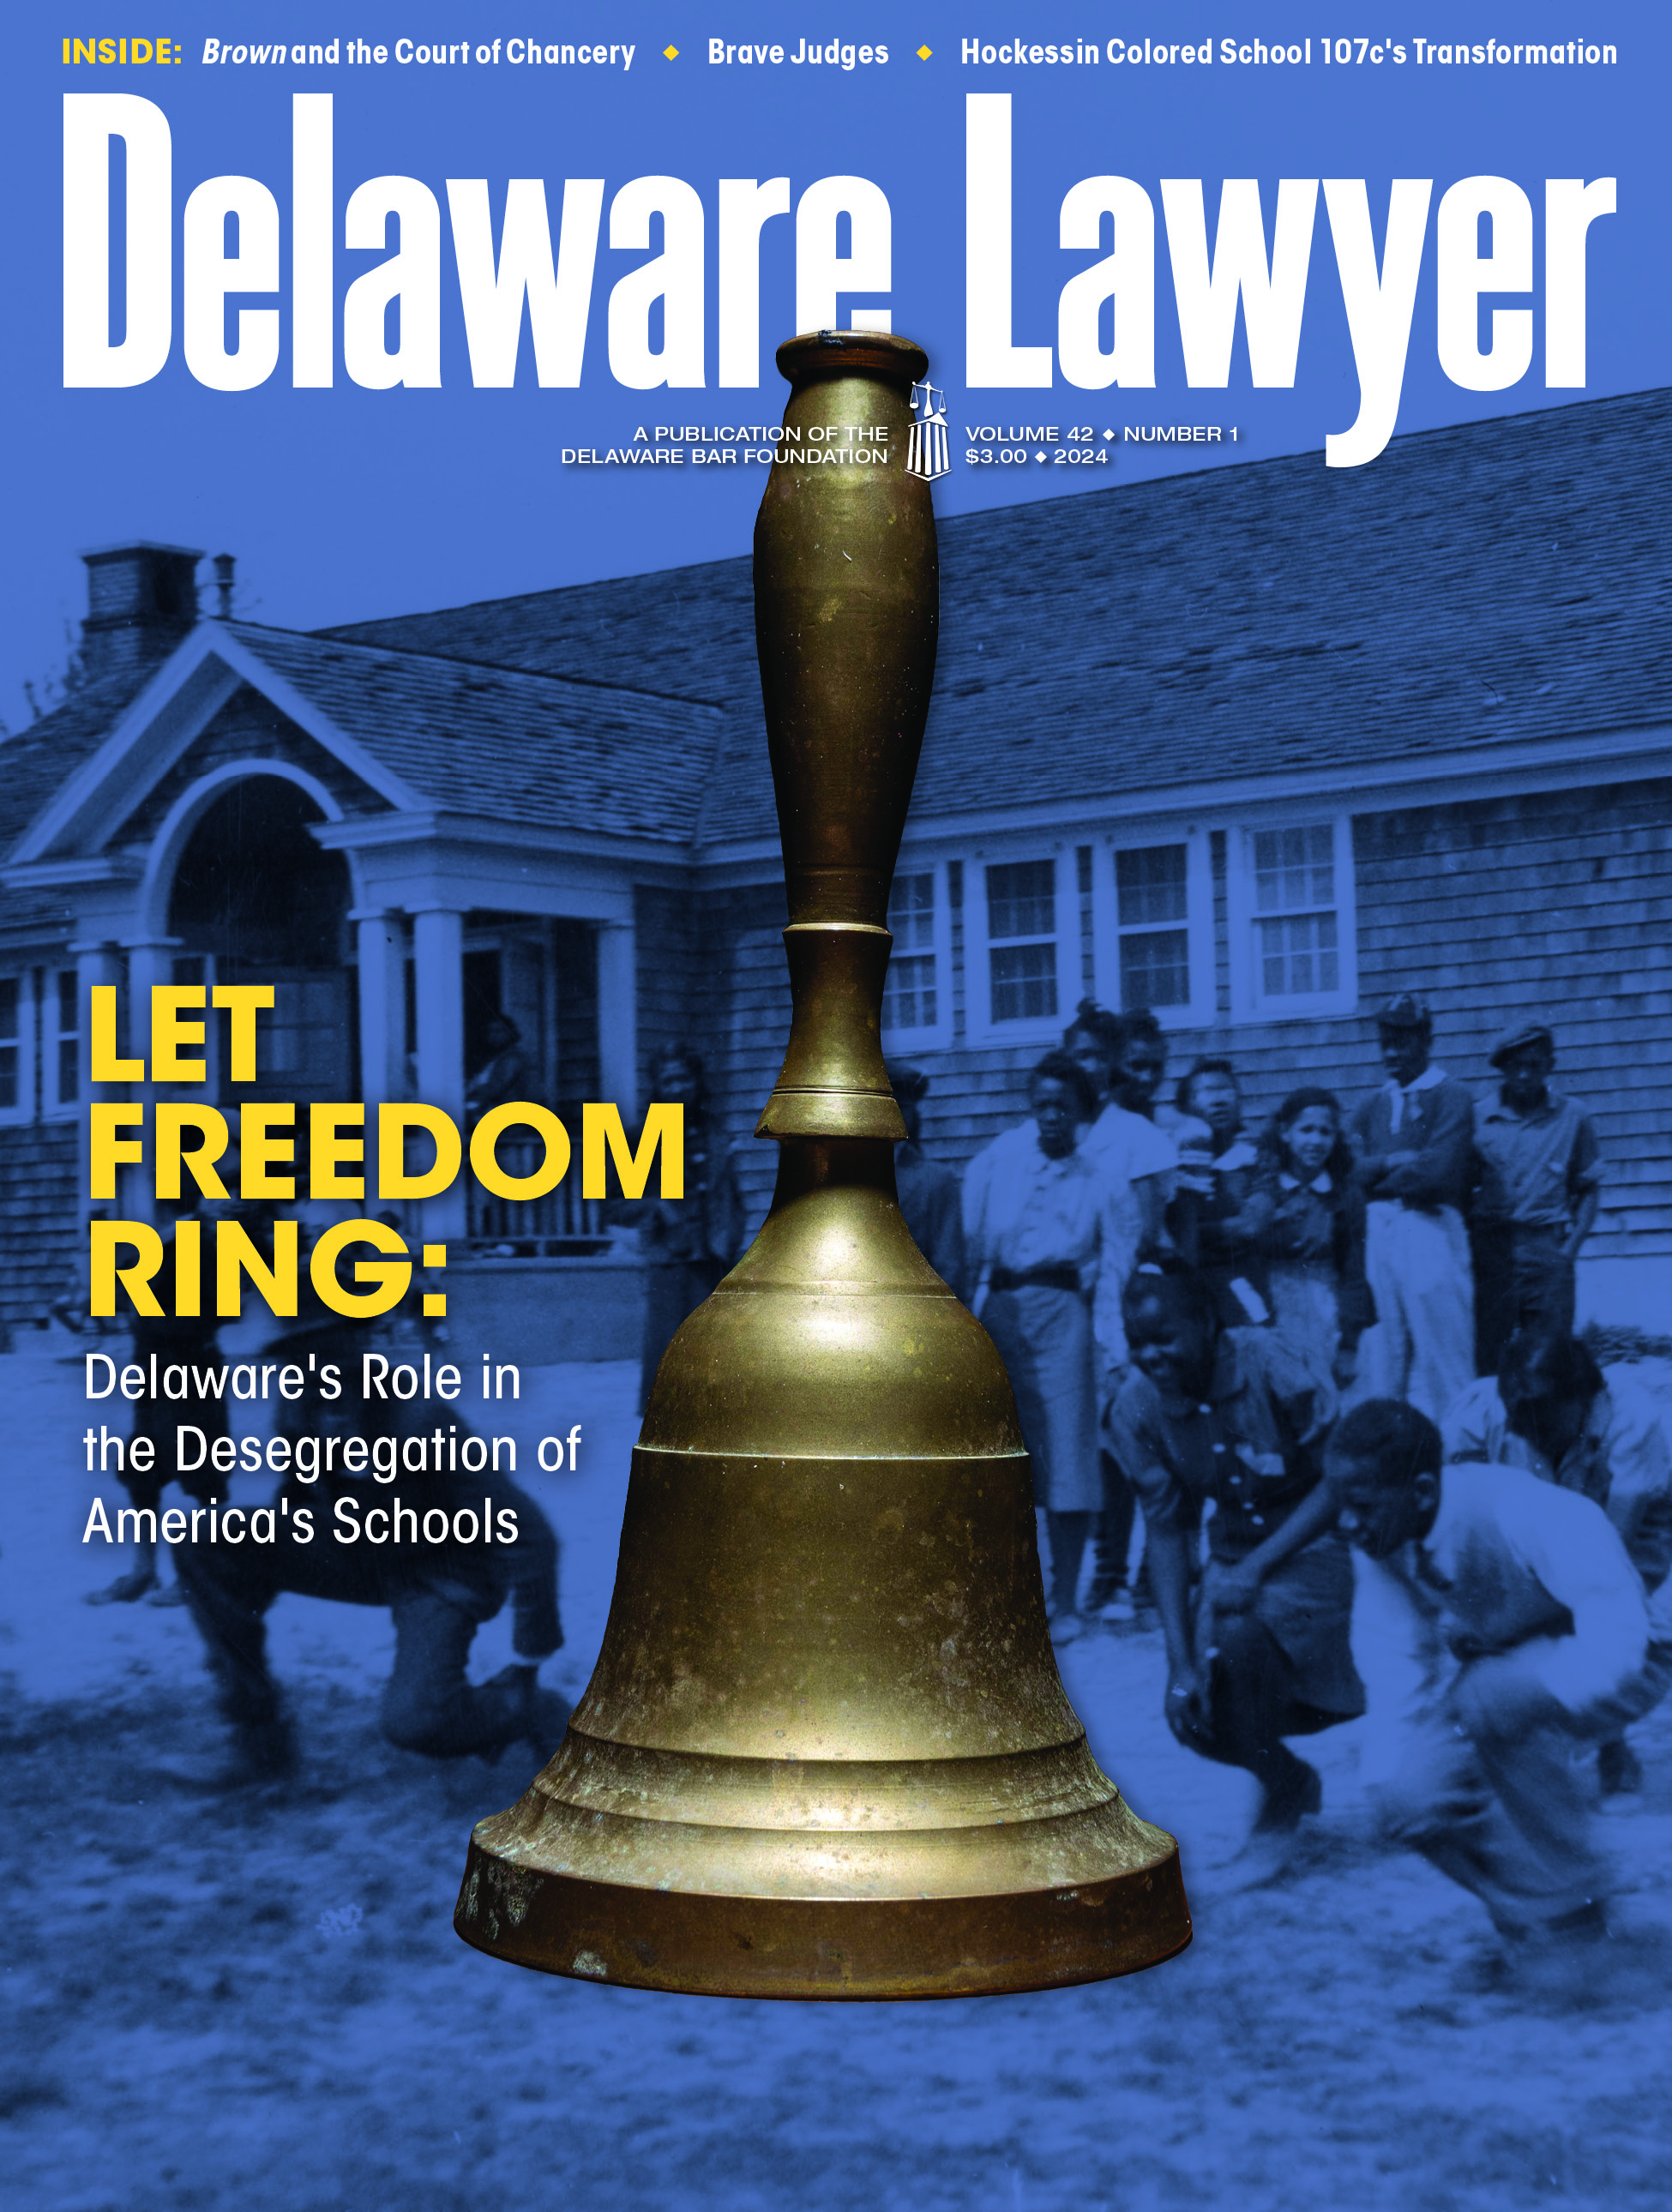 LET FREEDOM RING: Delaware's Role in the Desegregation of America's Schools